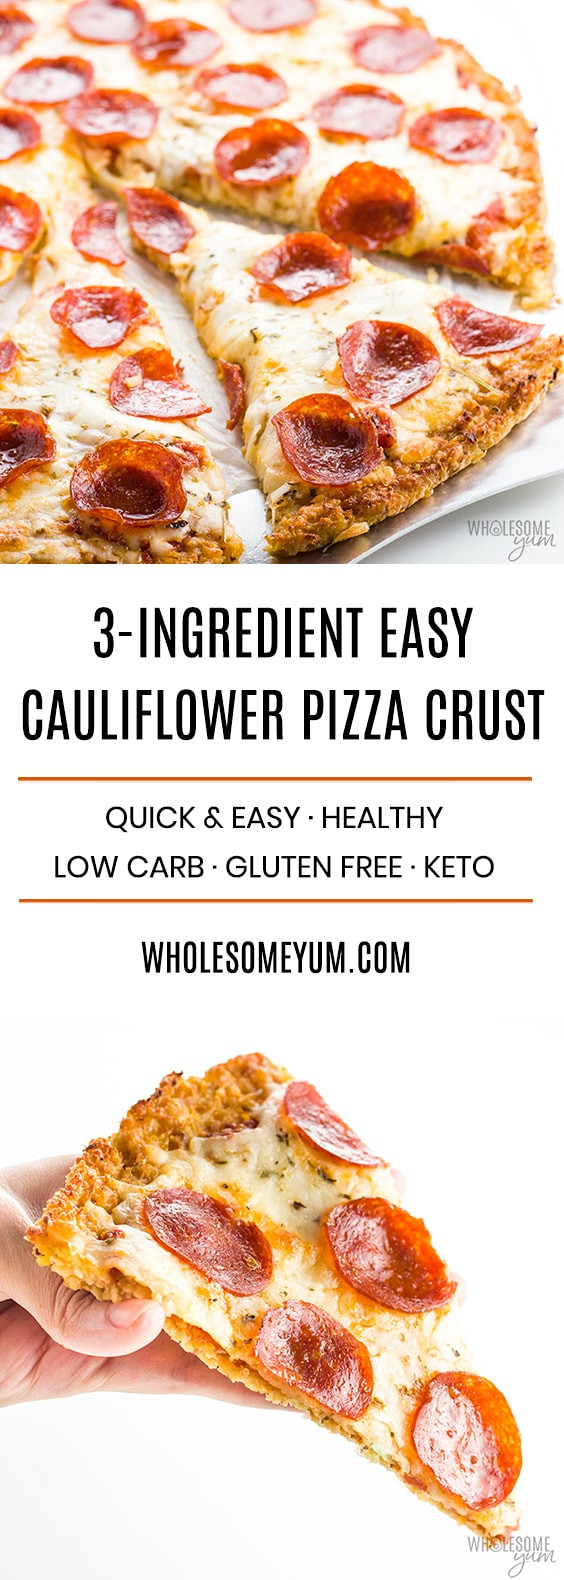 Low Carb Pizza Recipes
 Easy Low Carb Cauliflower Pizza Crust Recipe 3 Ingre nts